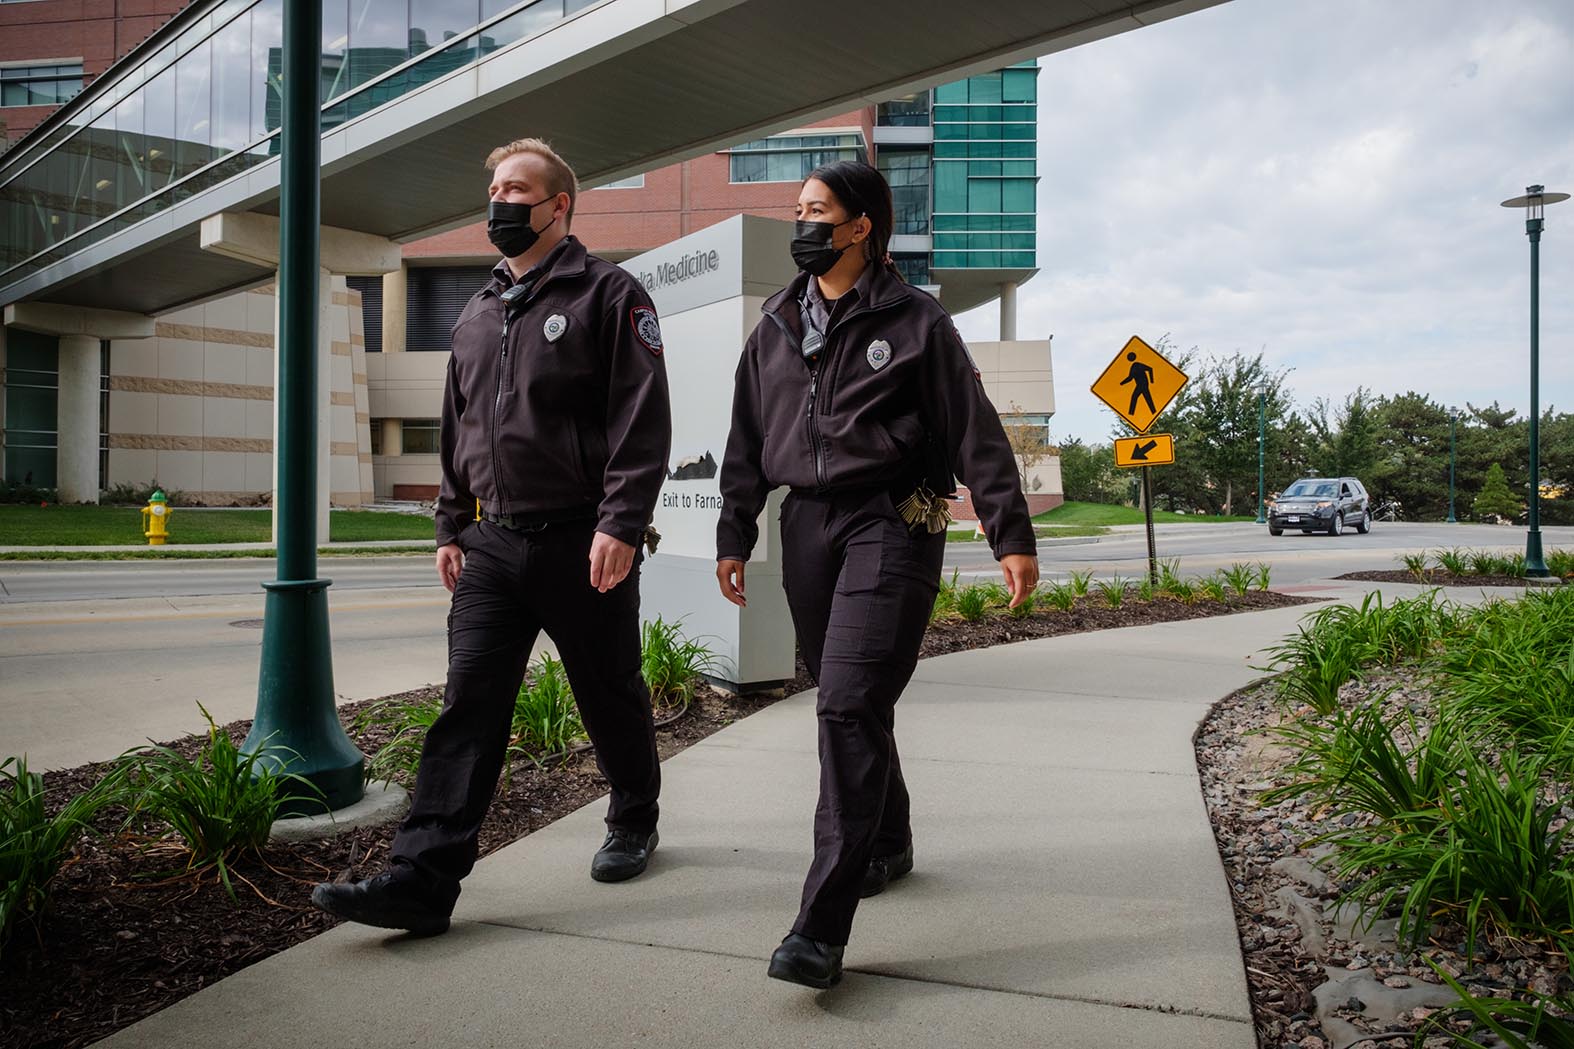 Campus security in uniforms walking outdoors.